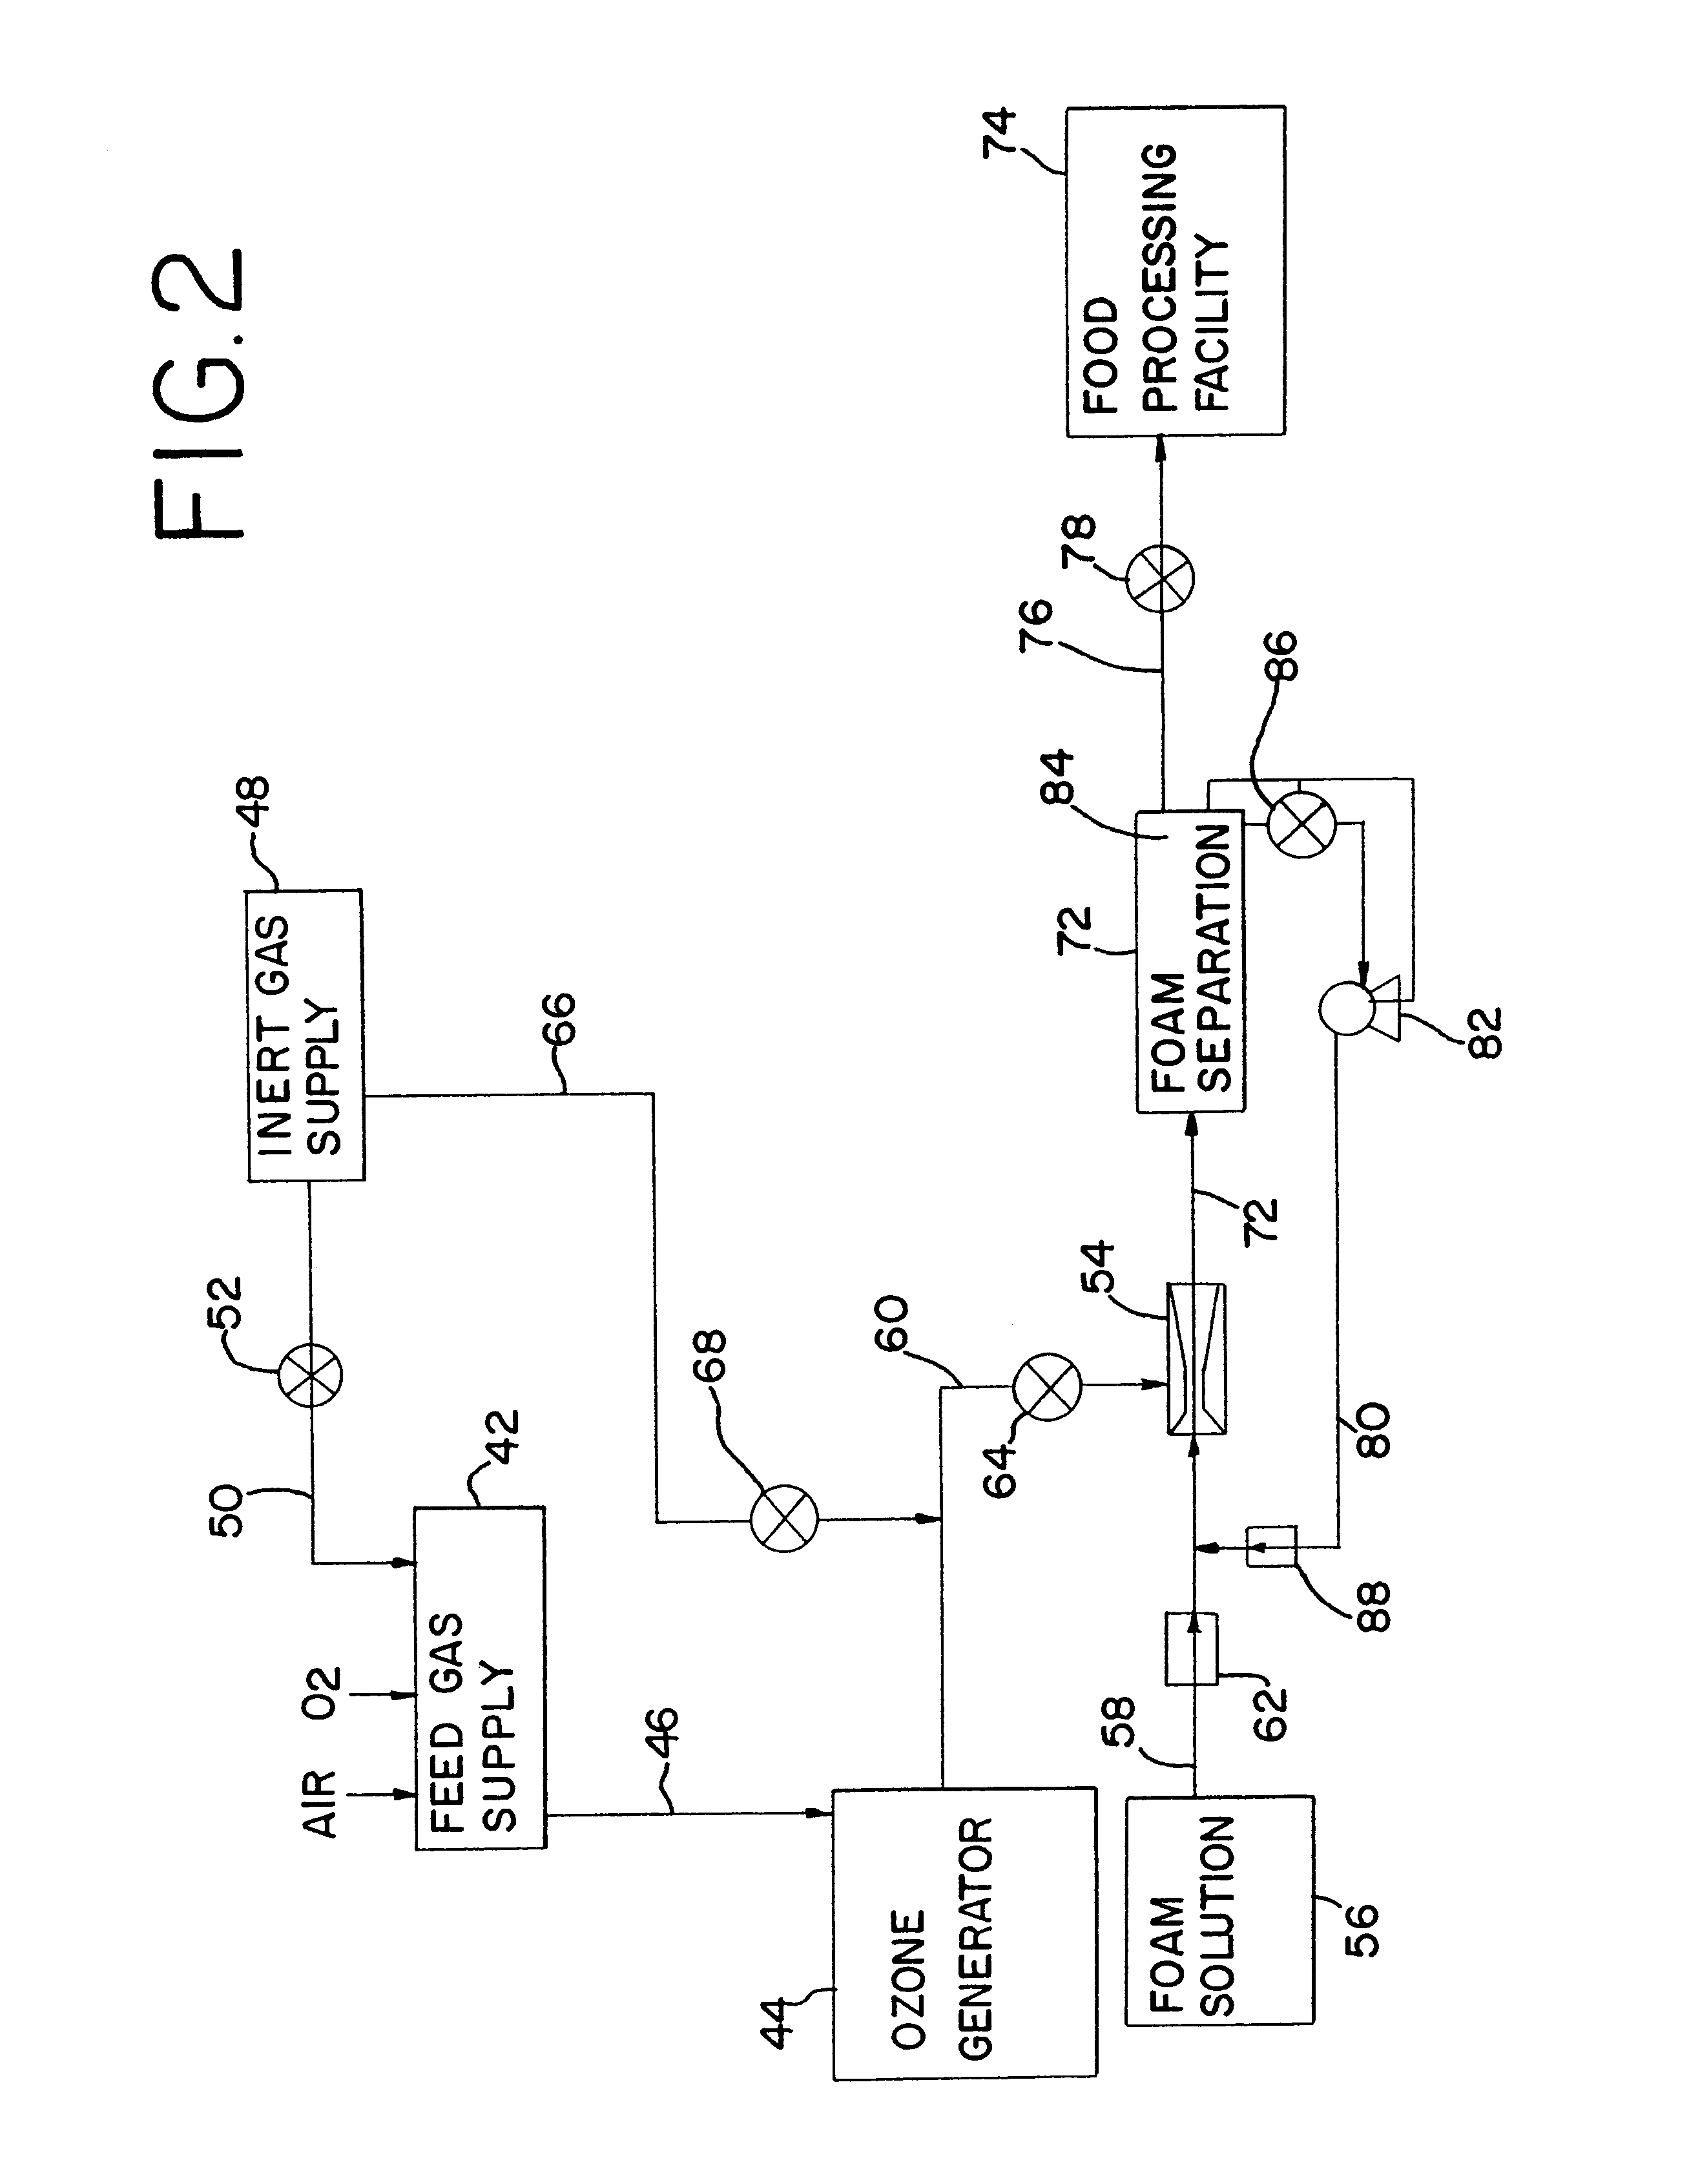 Ozonated foam medium and production system and method for sanitizing a food processing environment